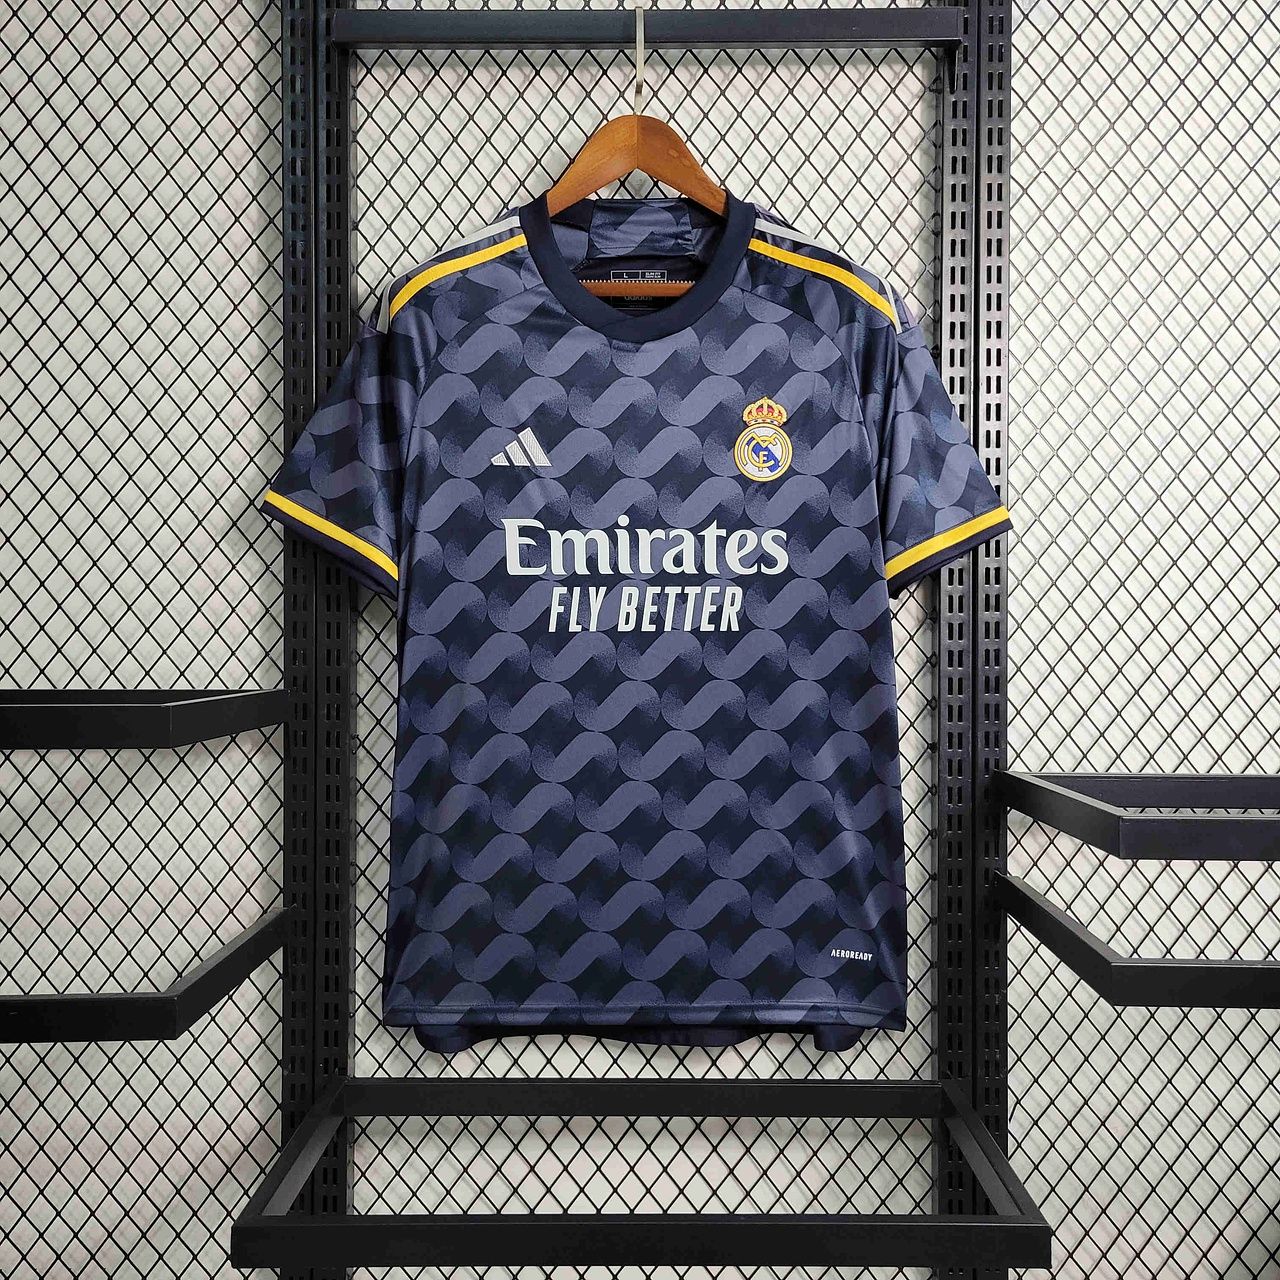 Camisola Real Madrid Secundária 23/24